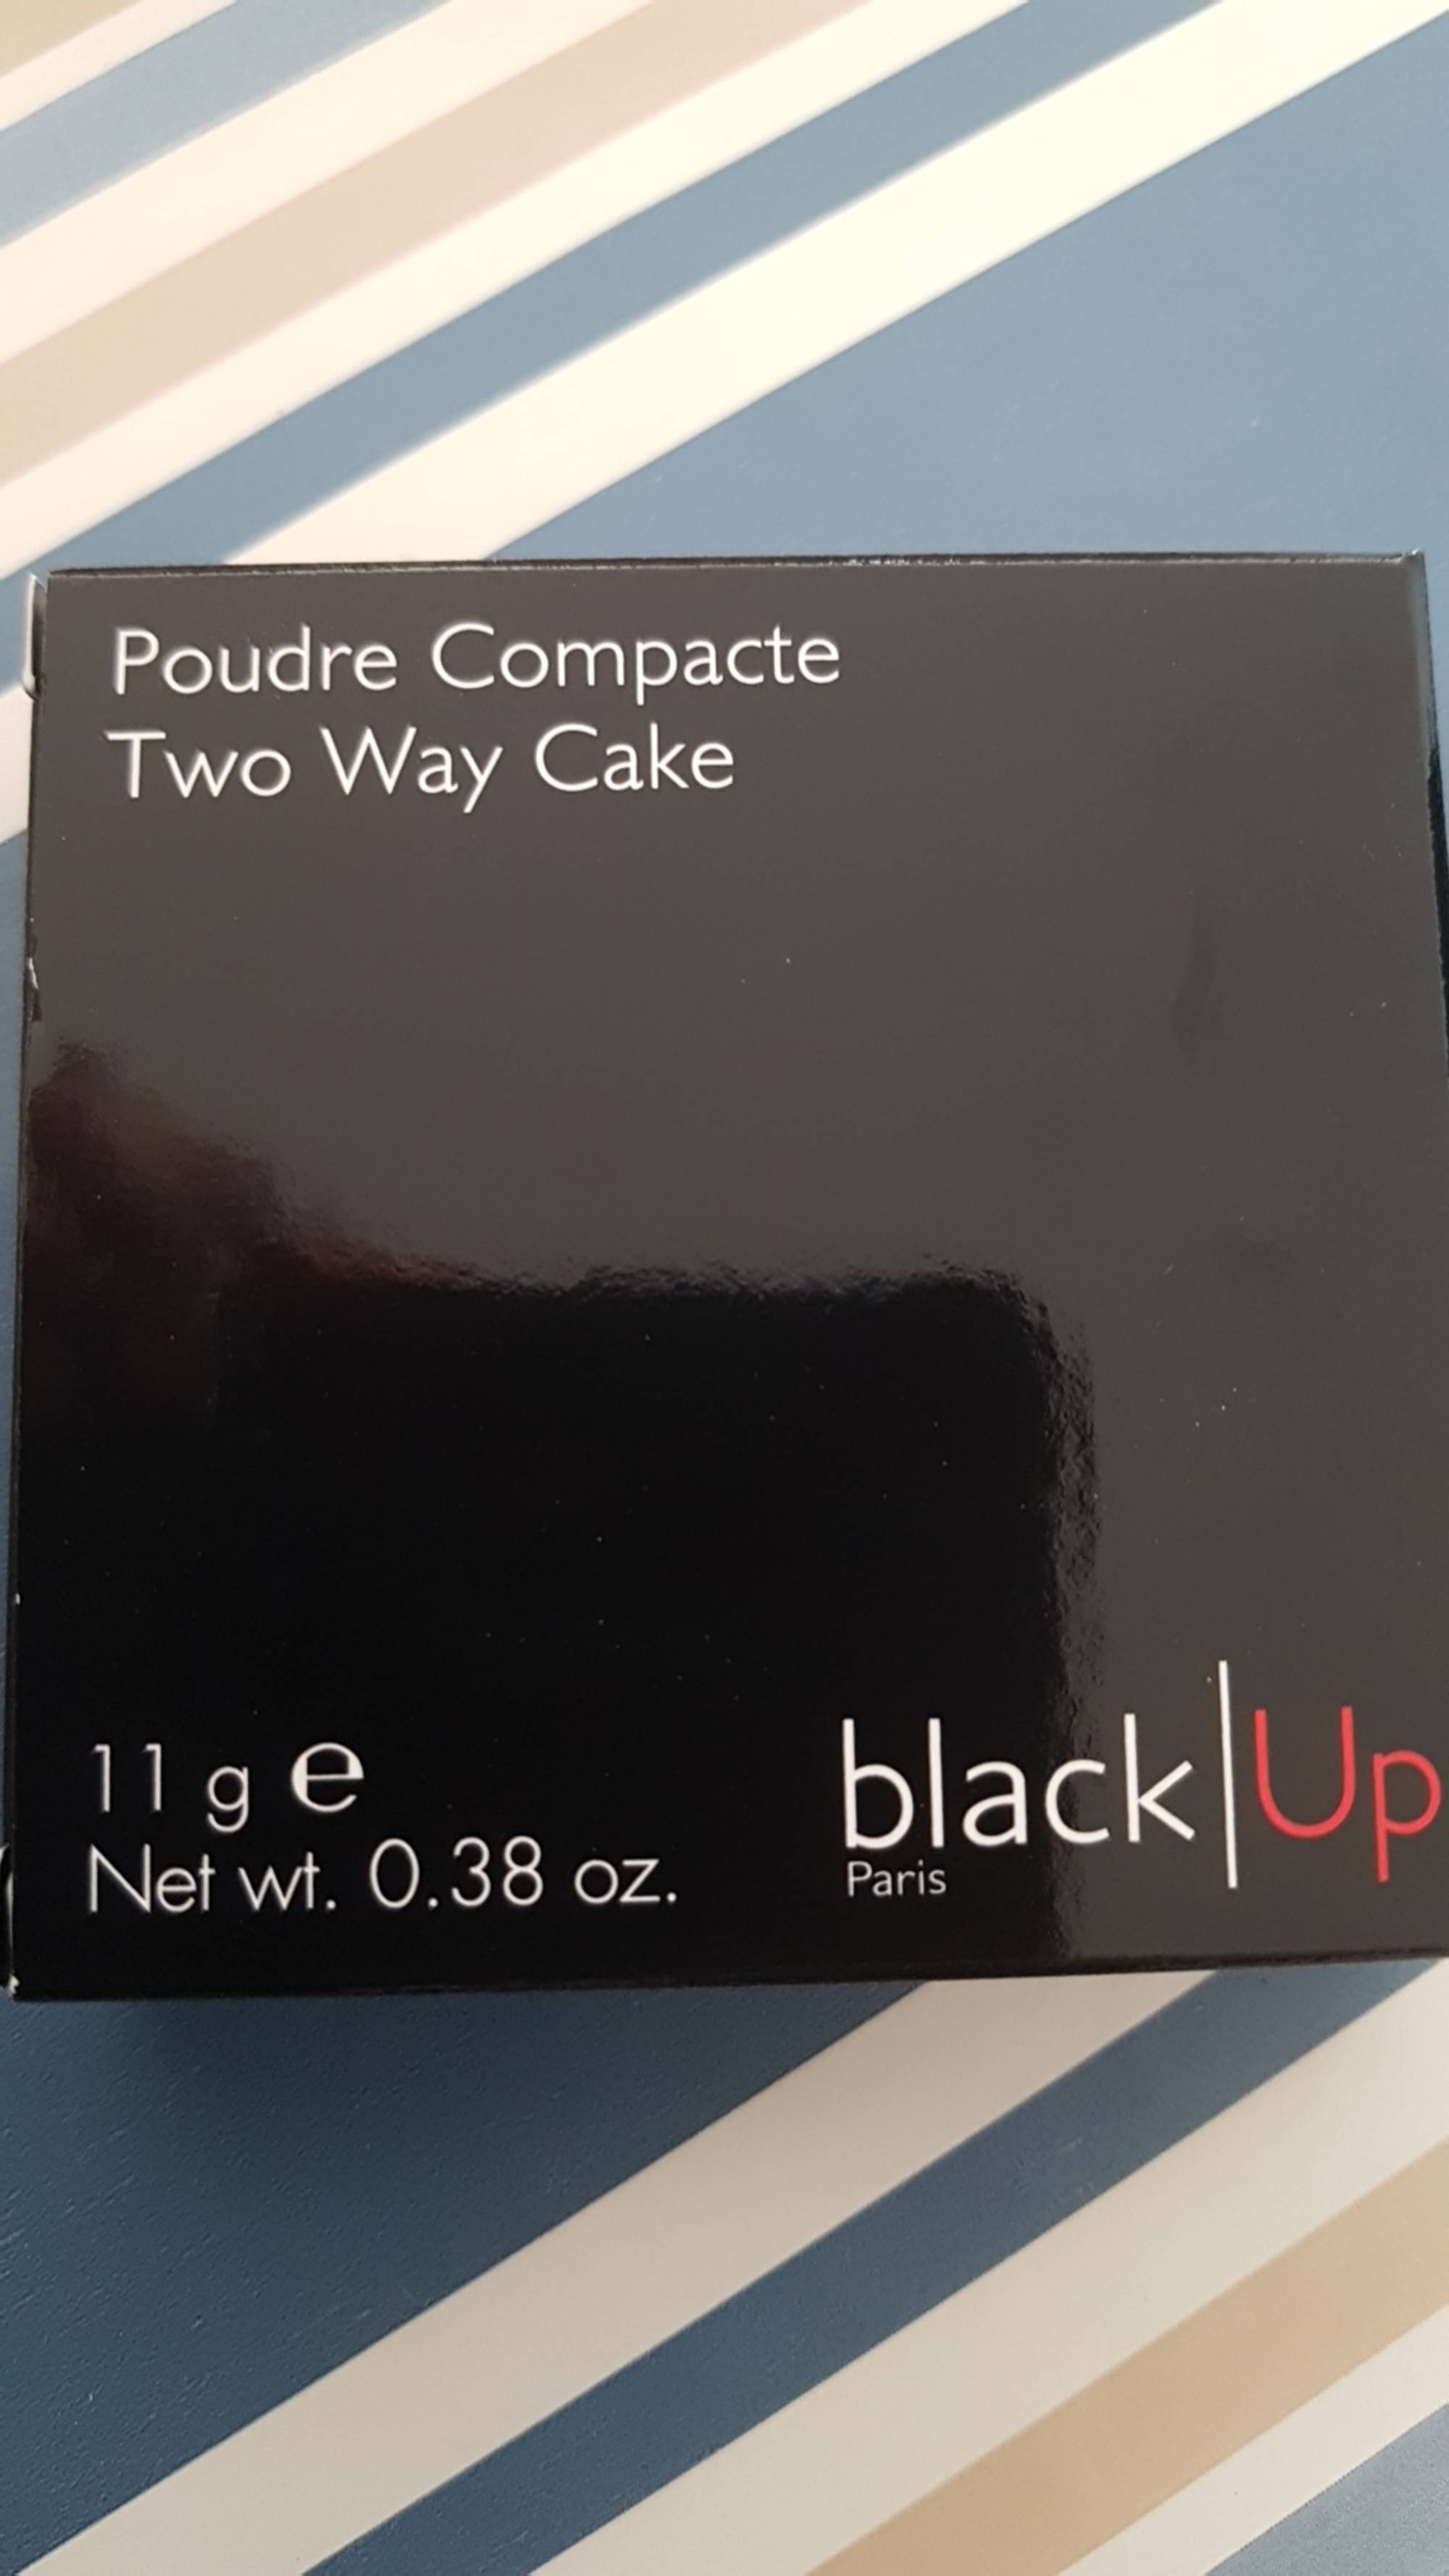 BLACK UP - Two way cake - Poudre compacte